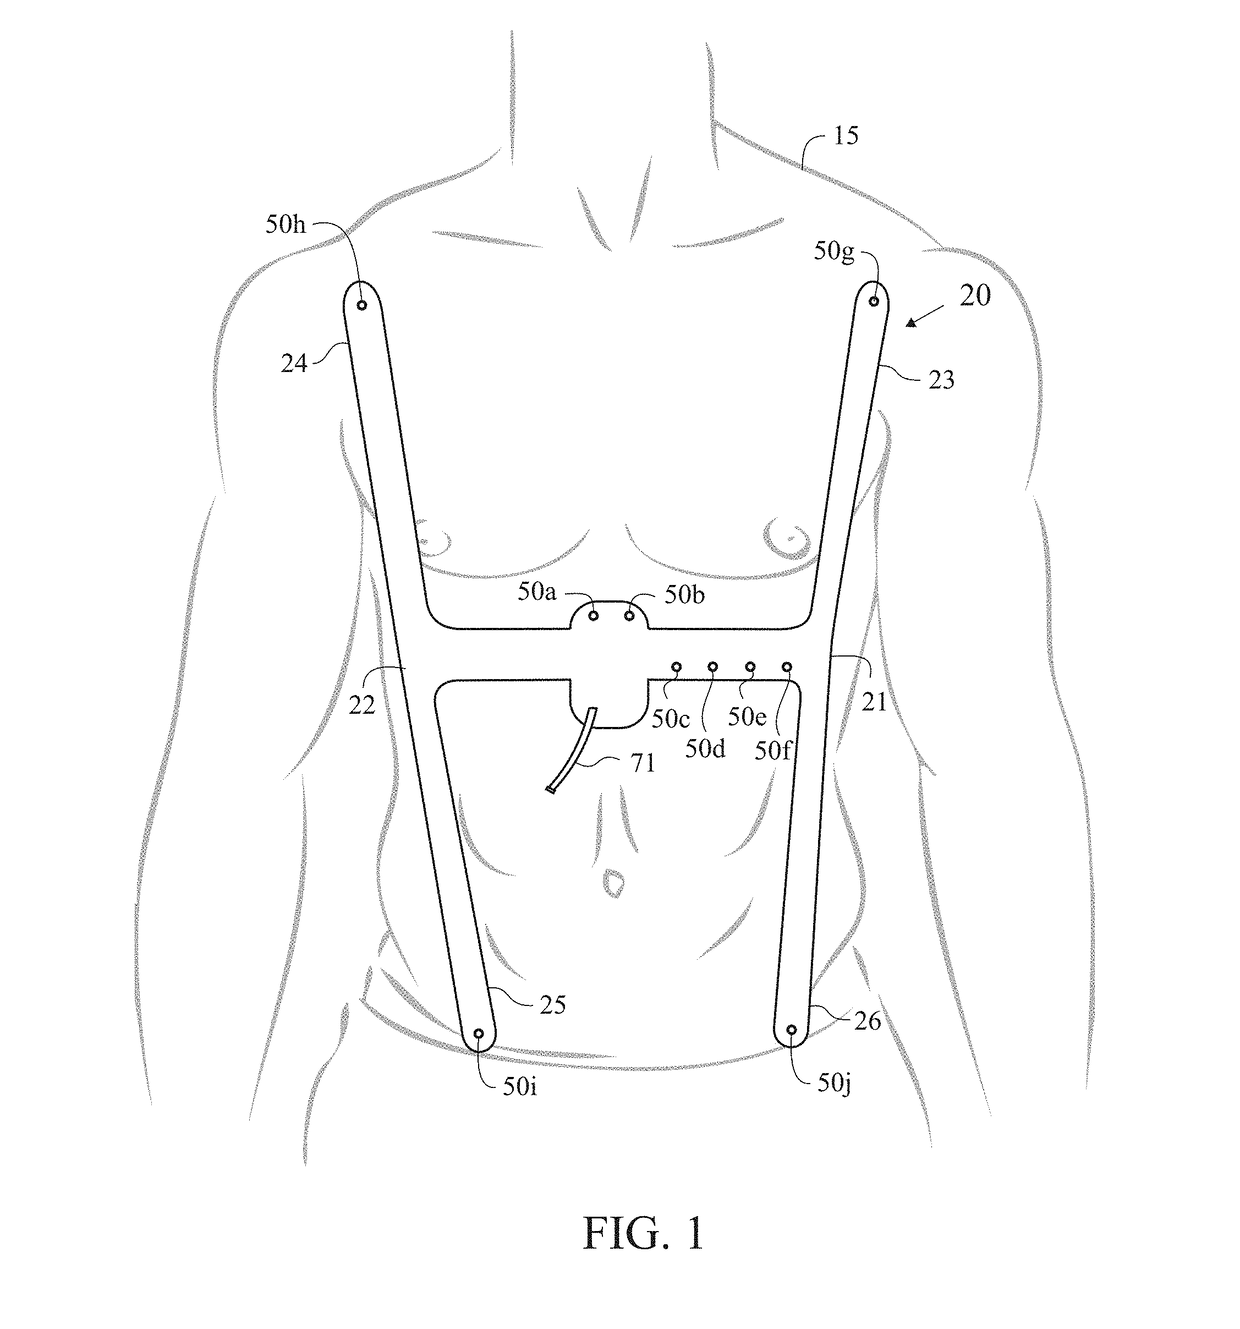 Emergency Cardiac And Electrocardiogram Electrode Placement System